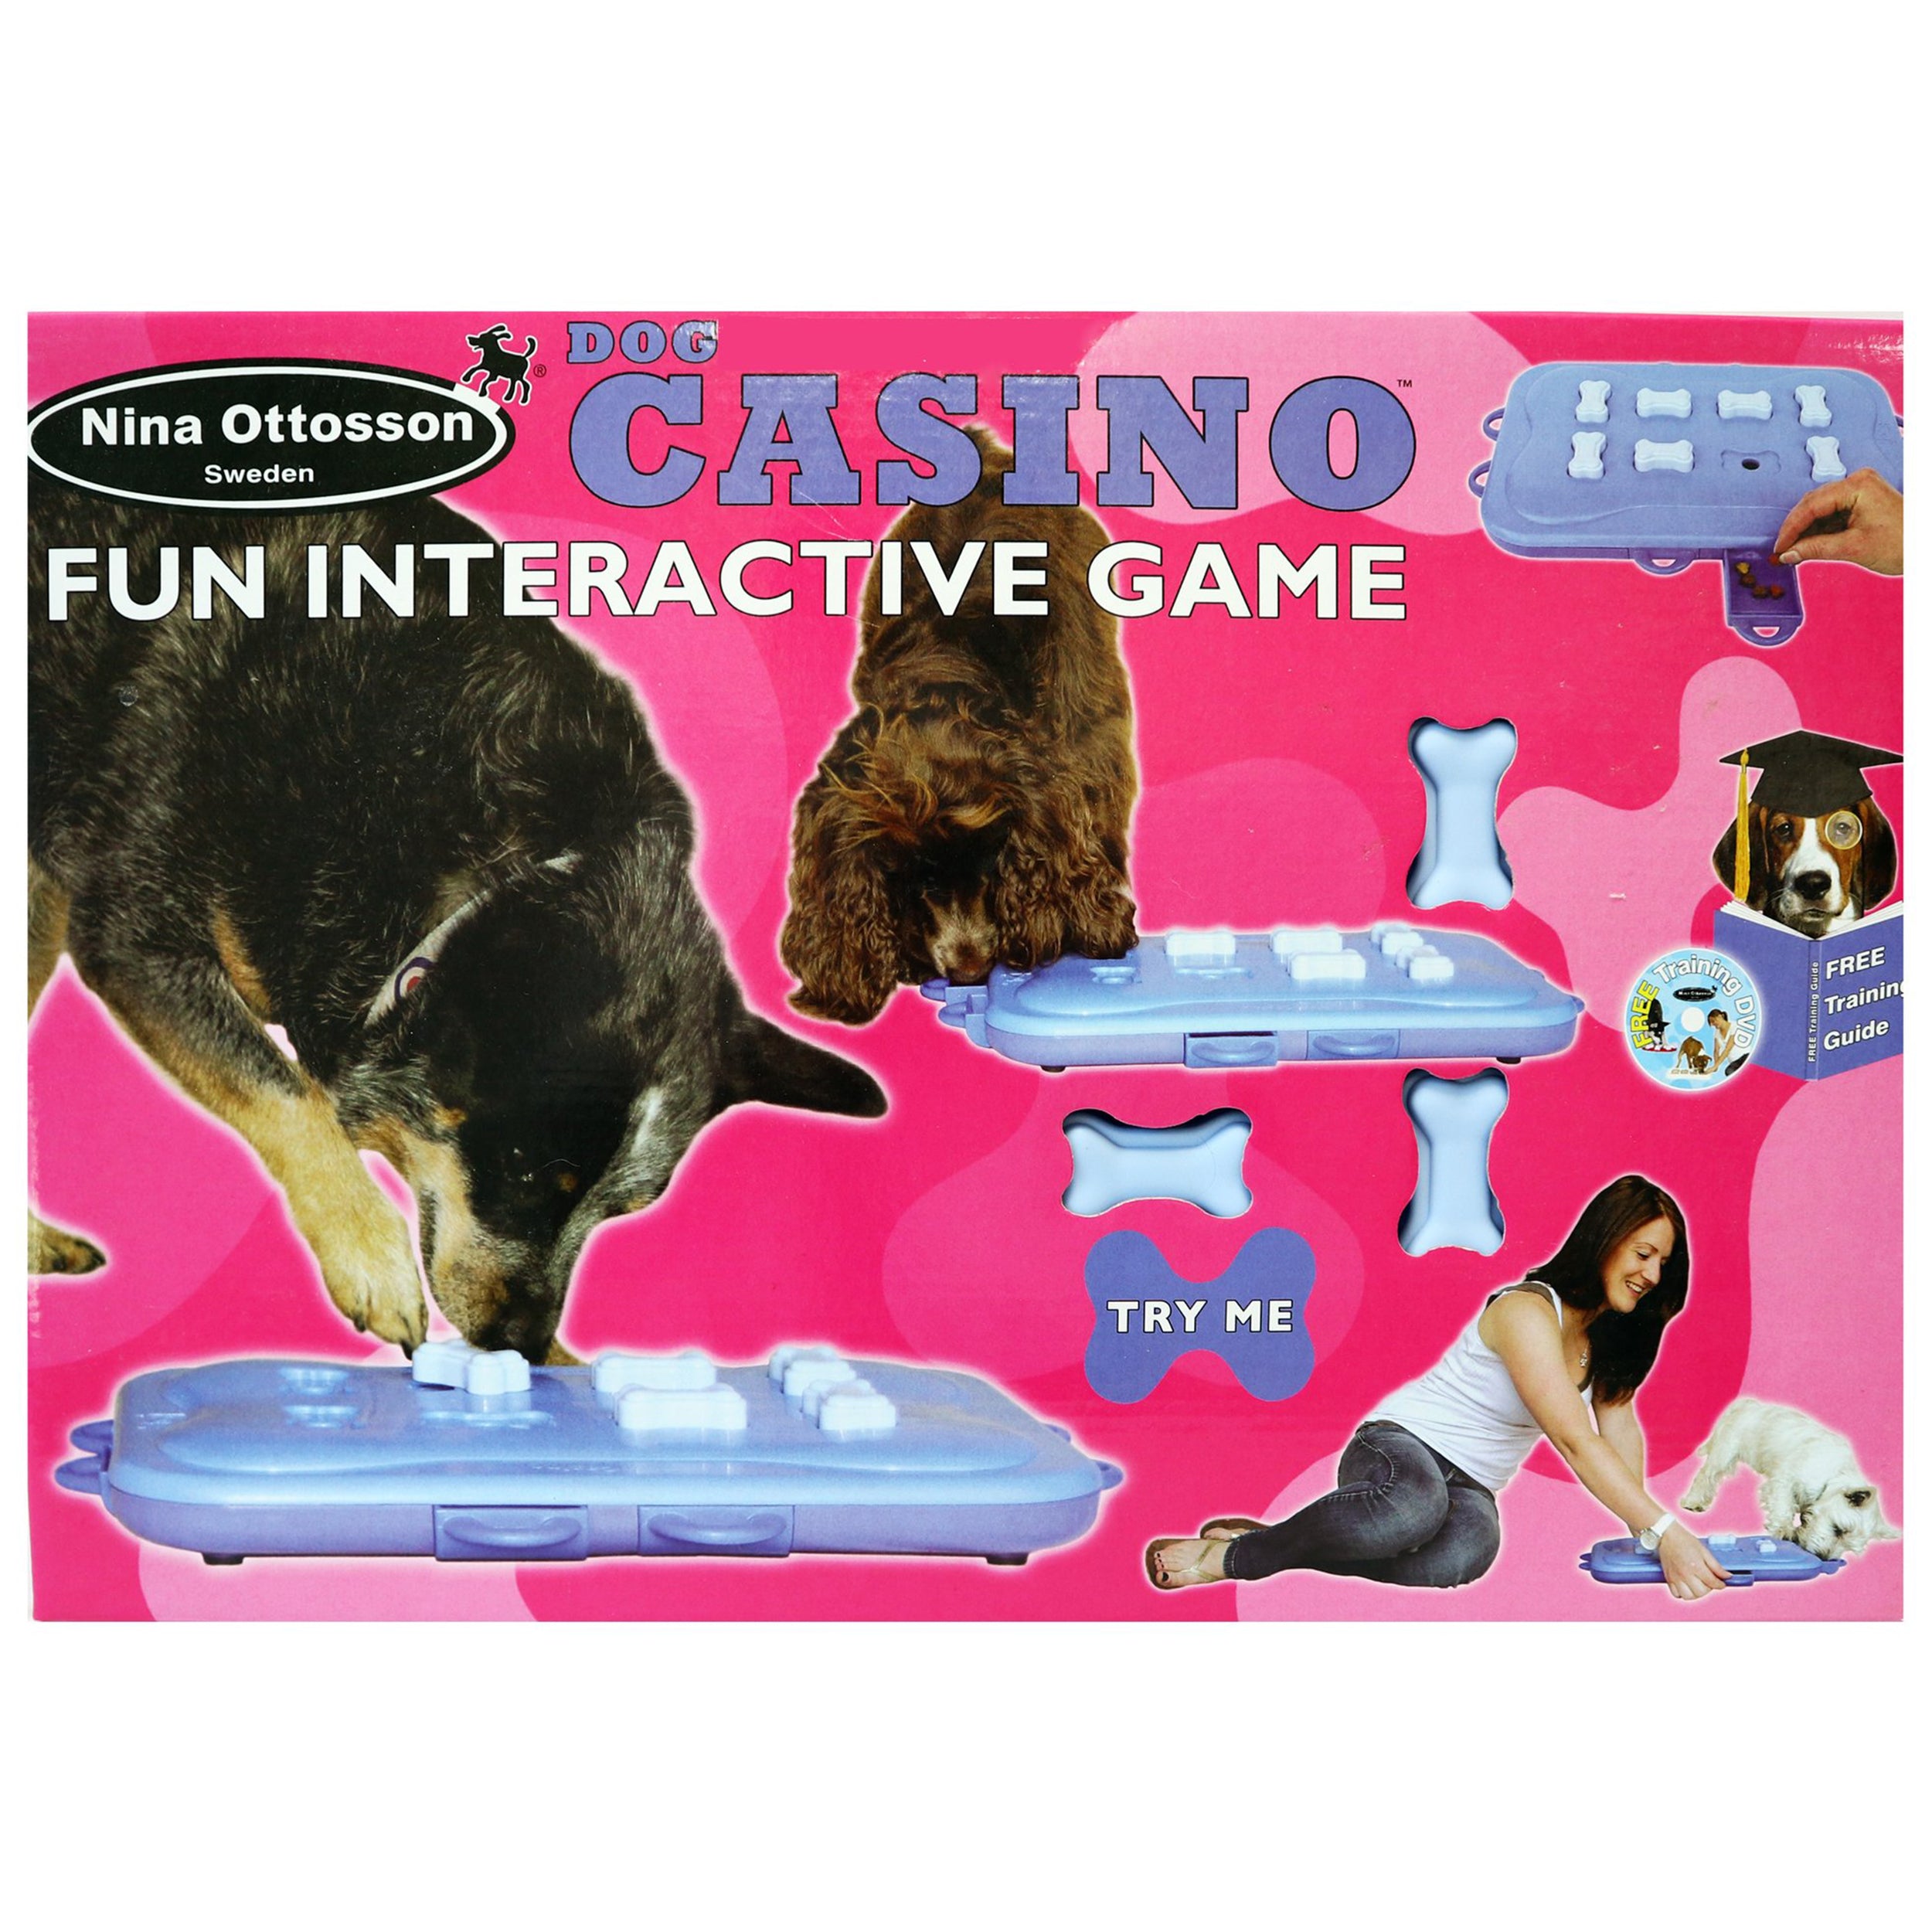 DOG CASINO - NEW - Nina Ottosson Treat Puzzle Games for Dogs & Cats